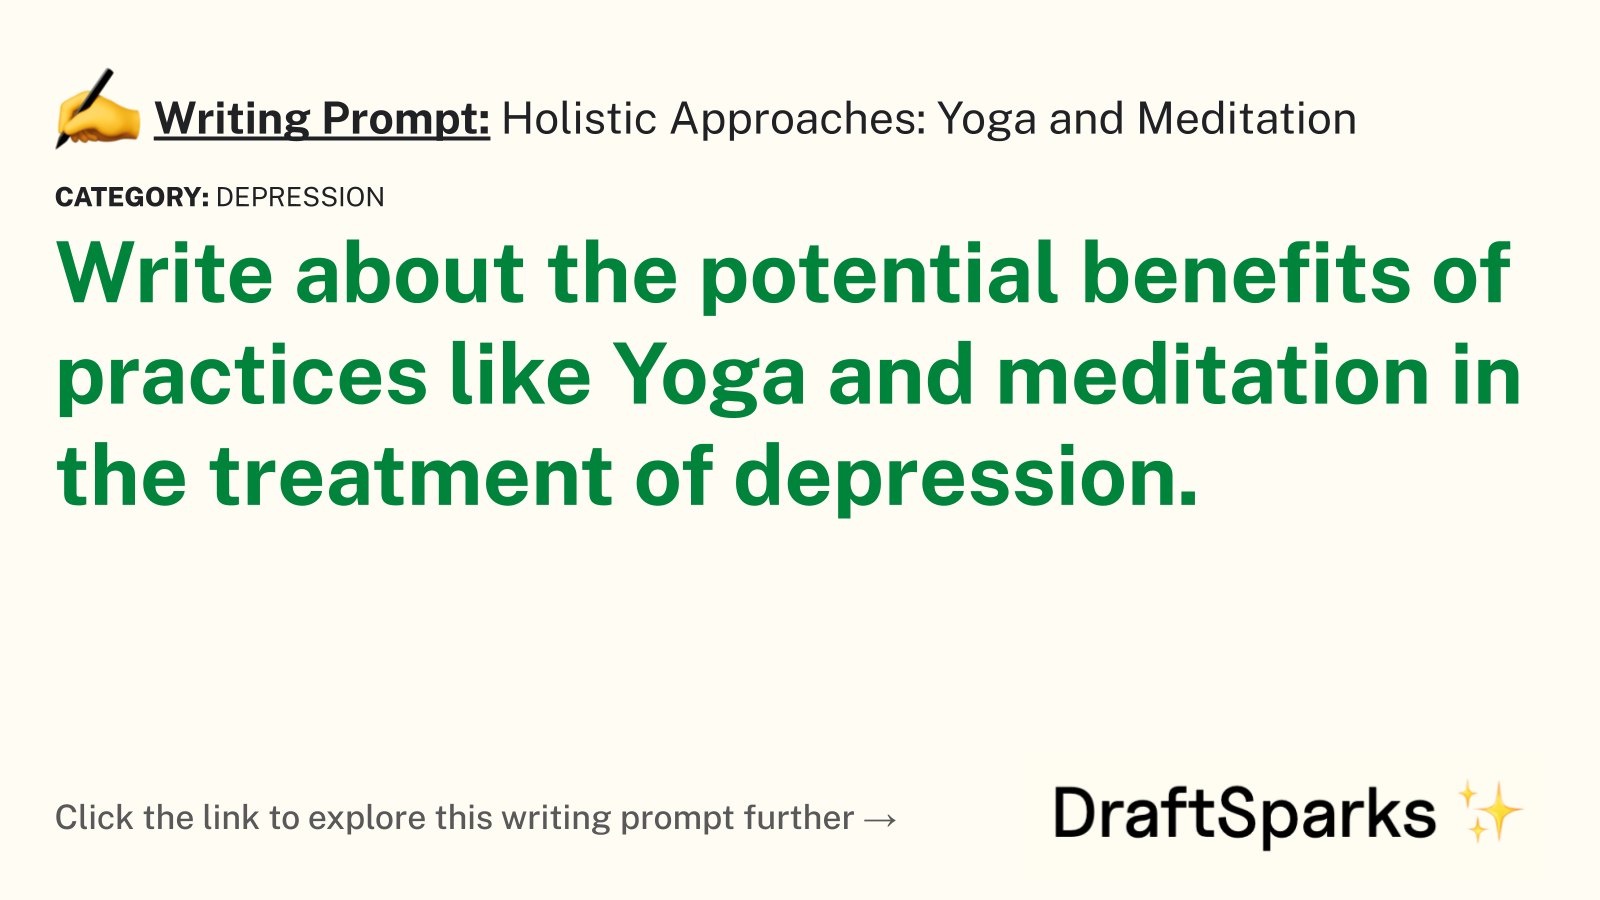 Holistic Approaches: Yoga and Meditation